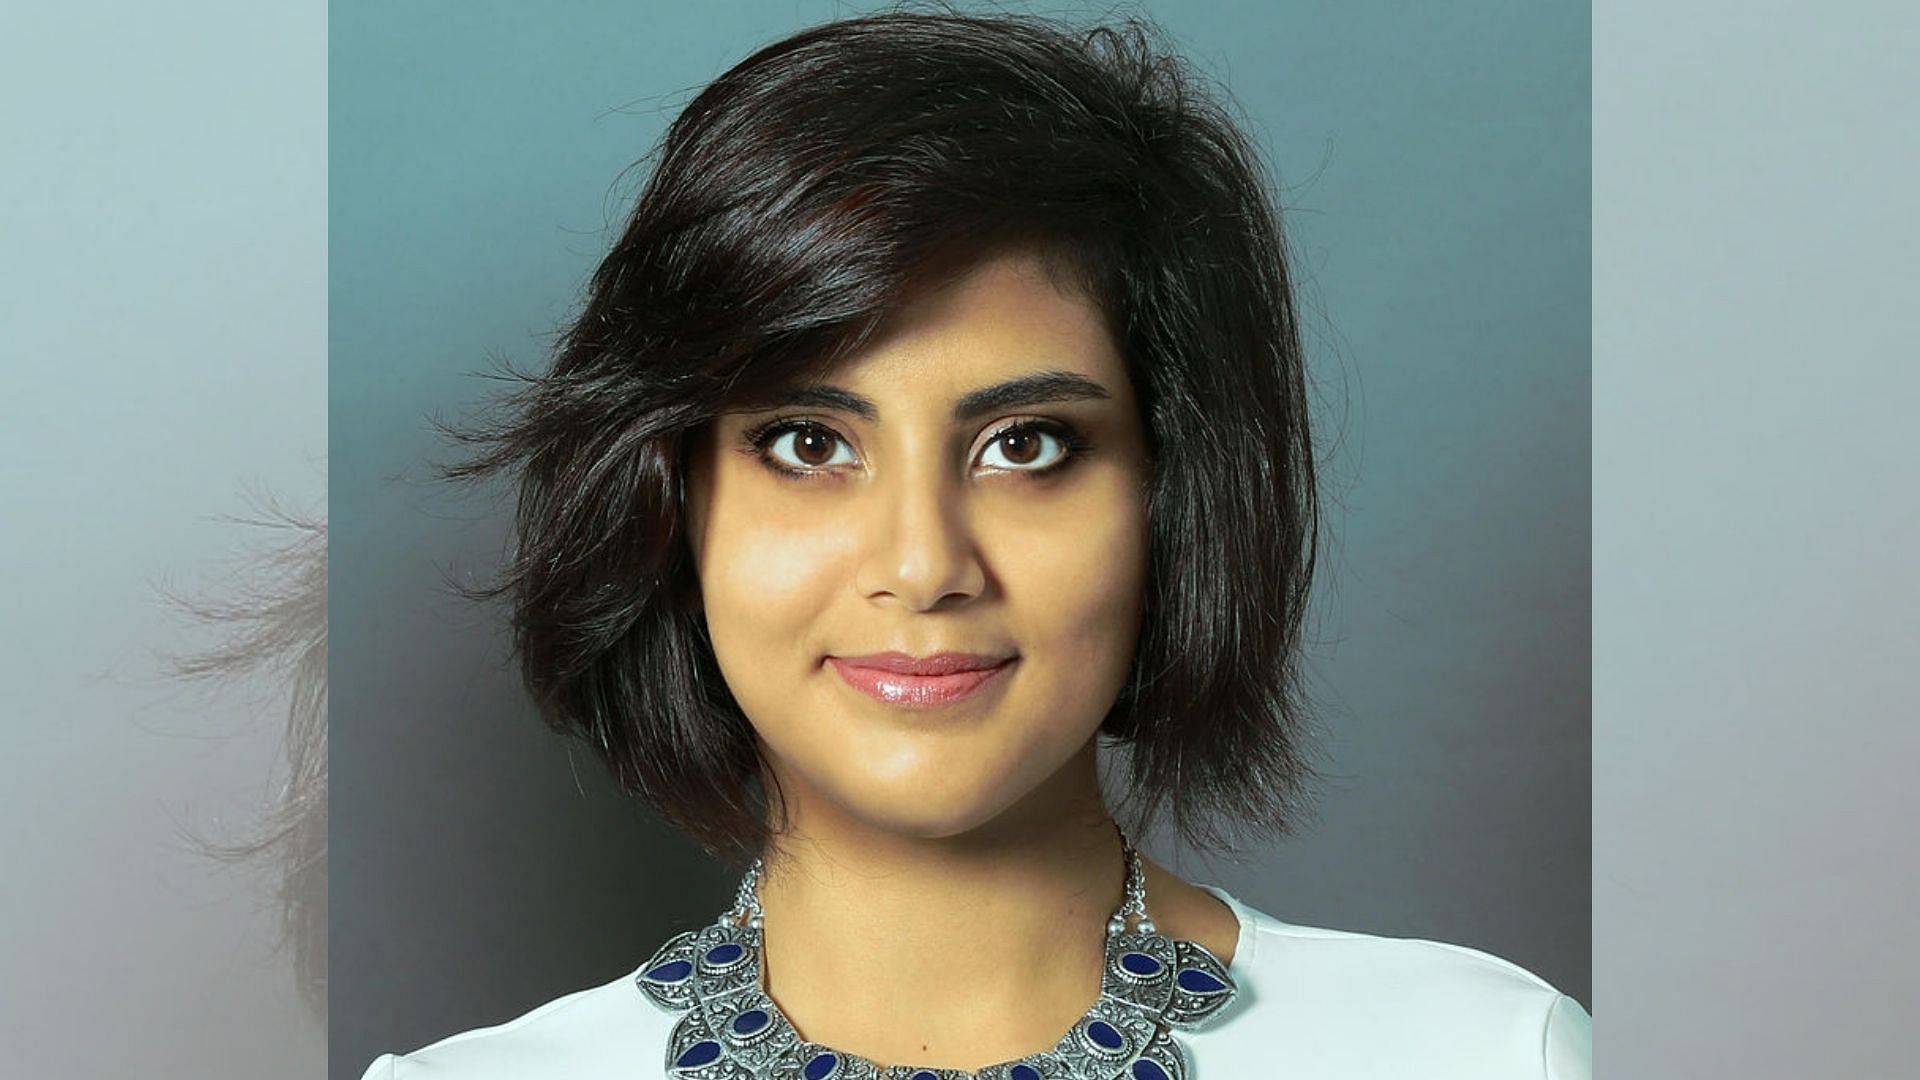 Loujain al-Hathloul was arrested and released several occasions for defying the ban on women driving in Saudi Arabia.